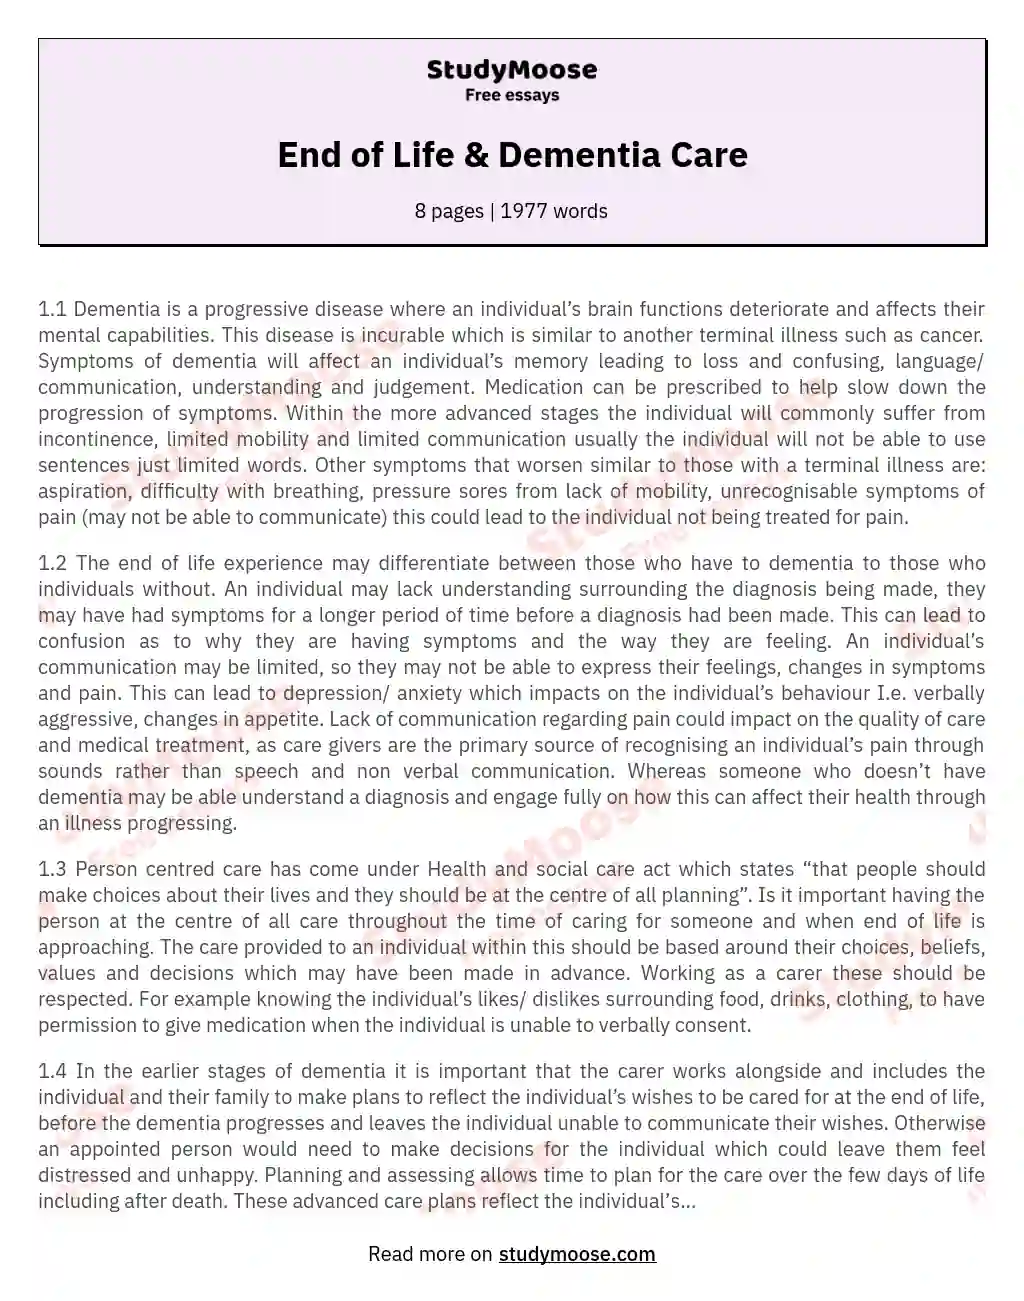 End of Life & Dementia Care essay